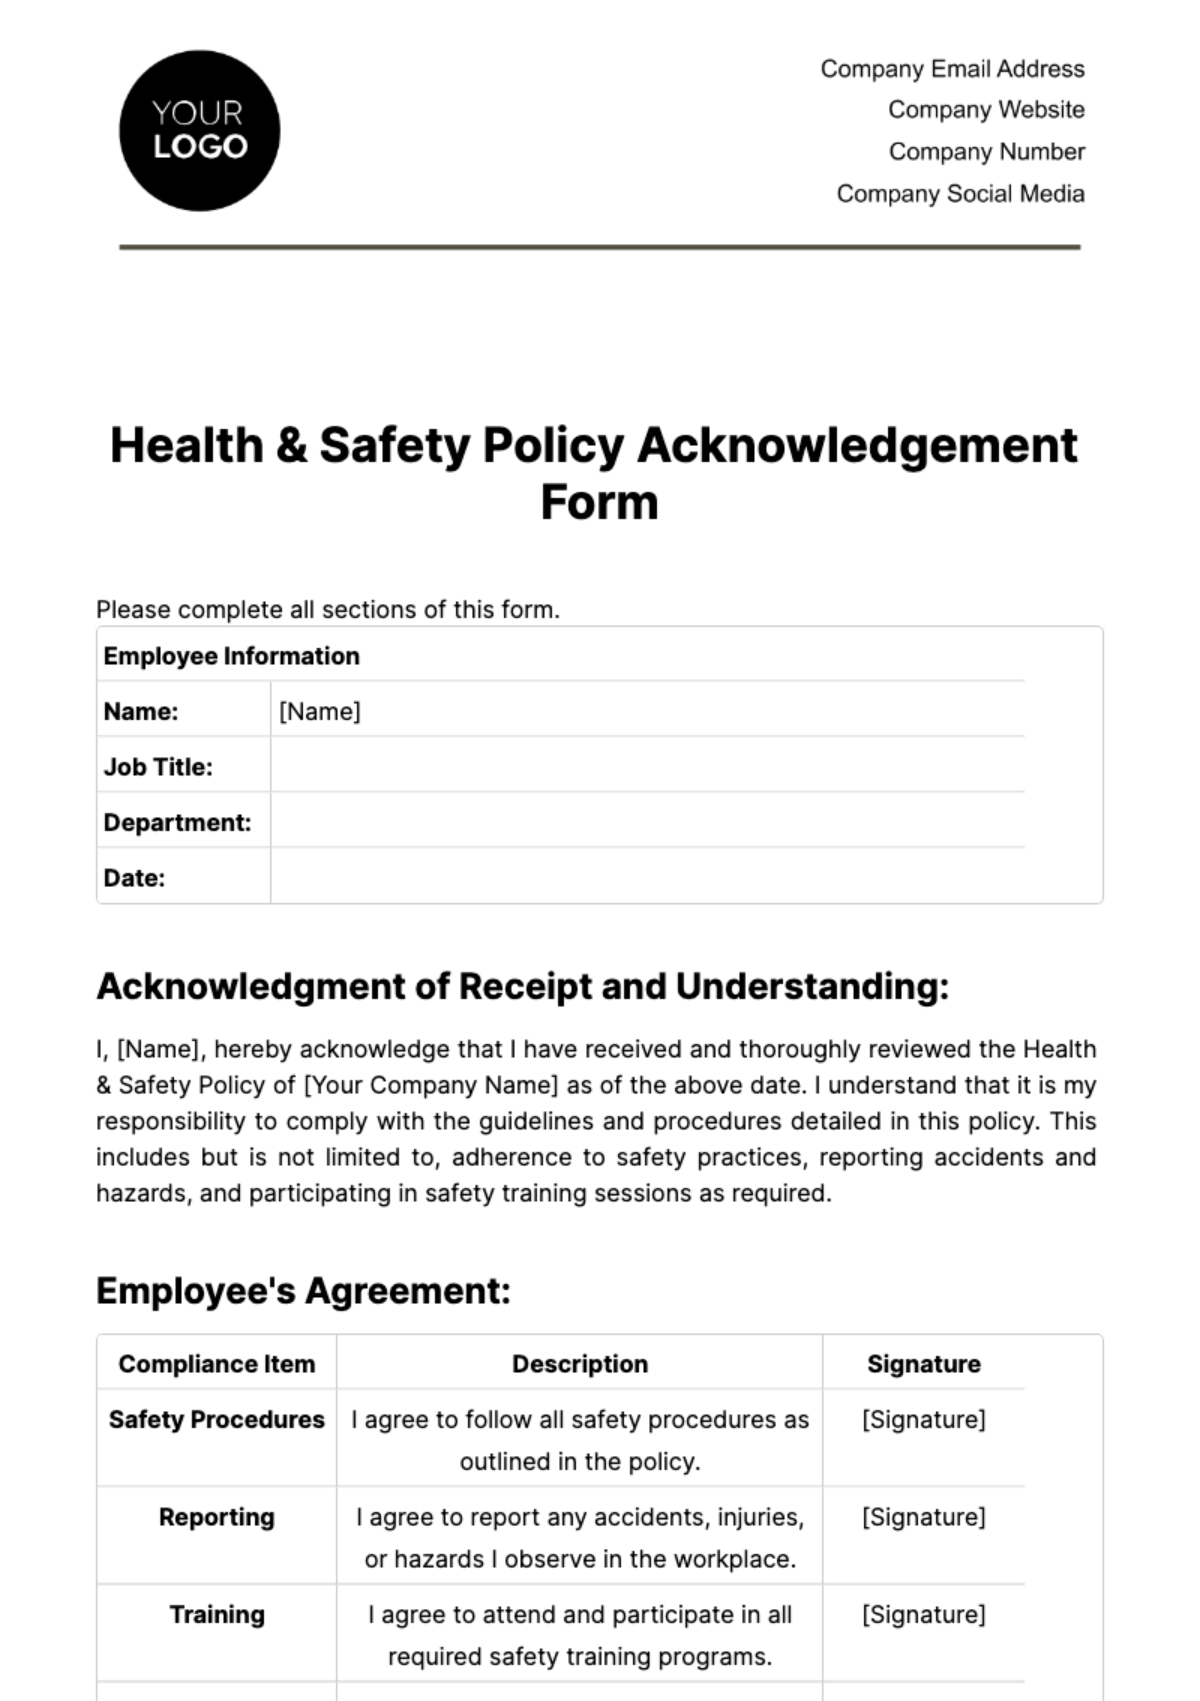 Free Health & Safety Policy Acknowledgement Form Template